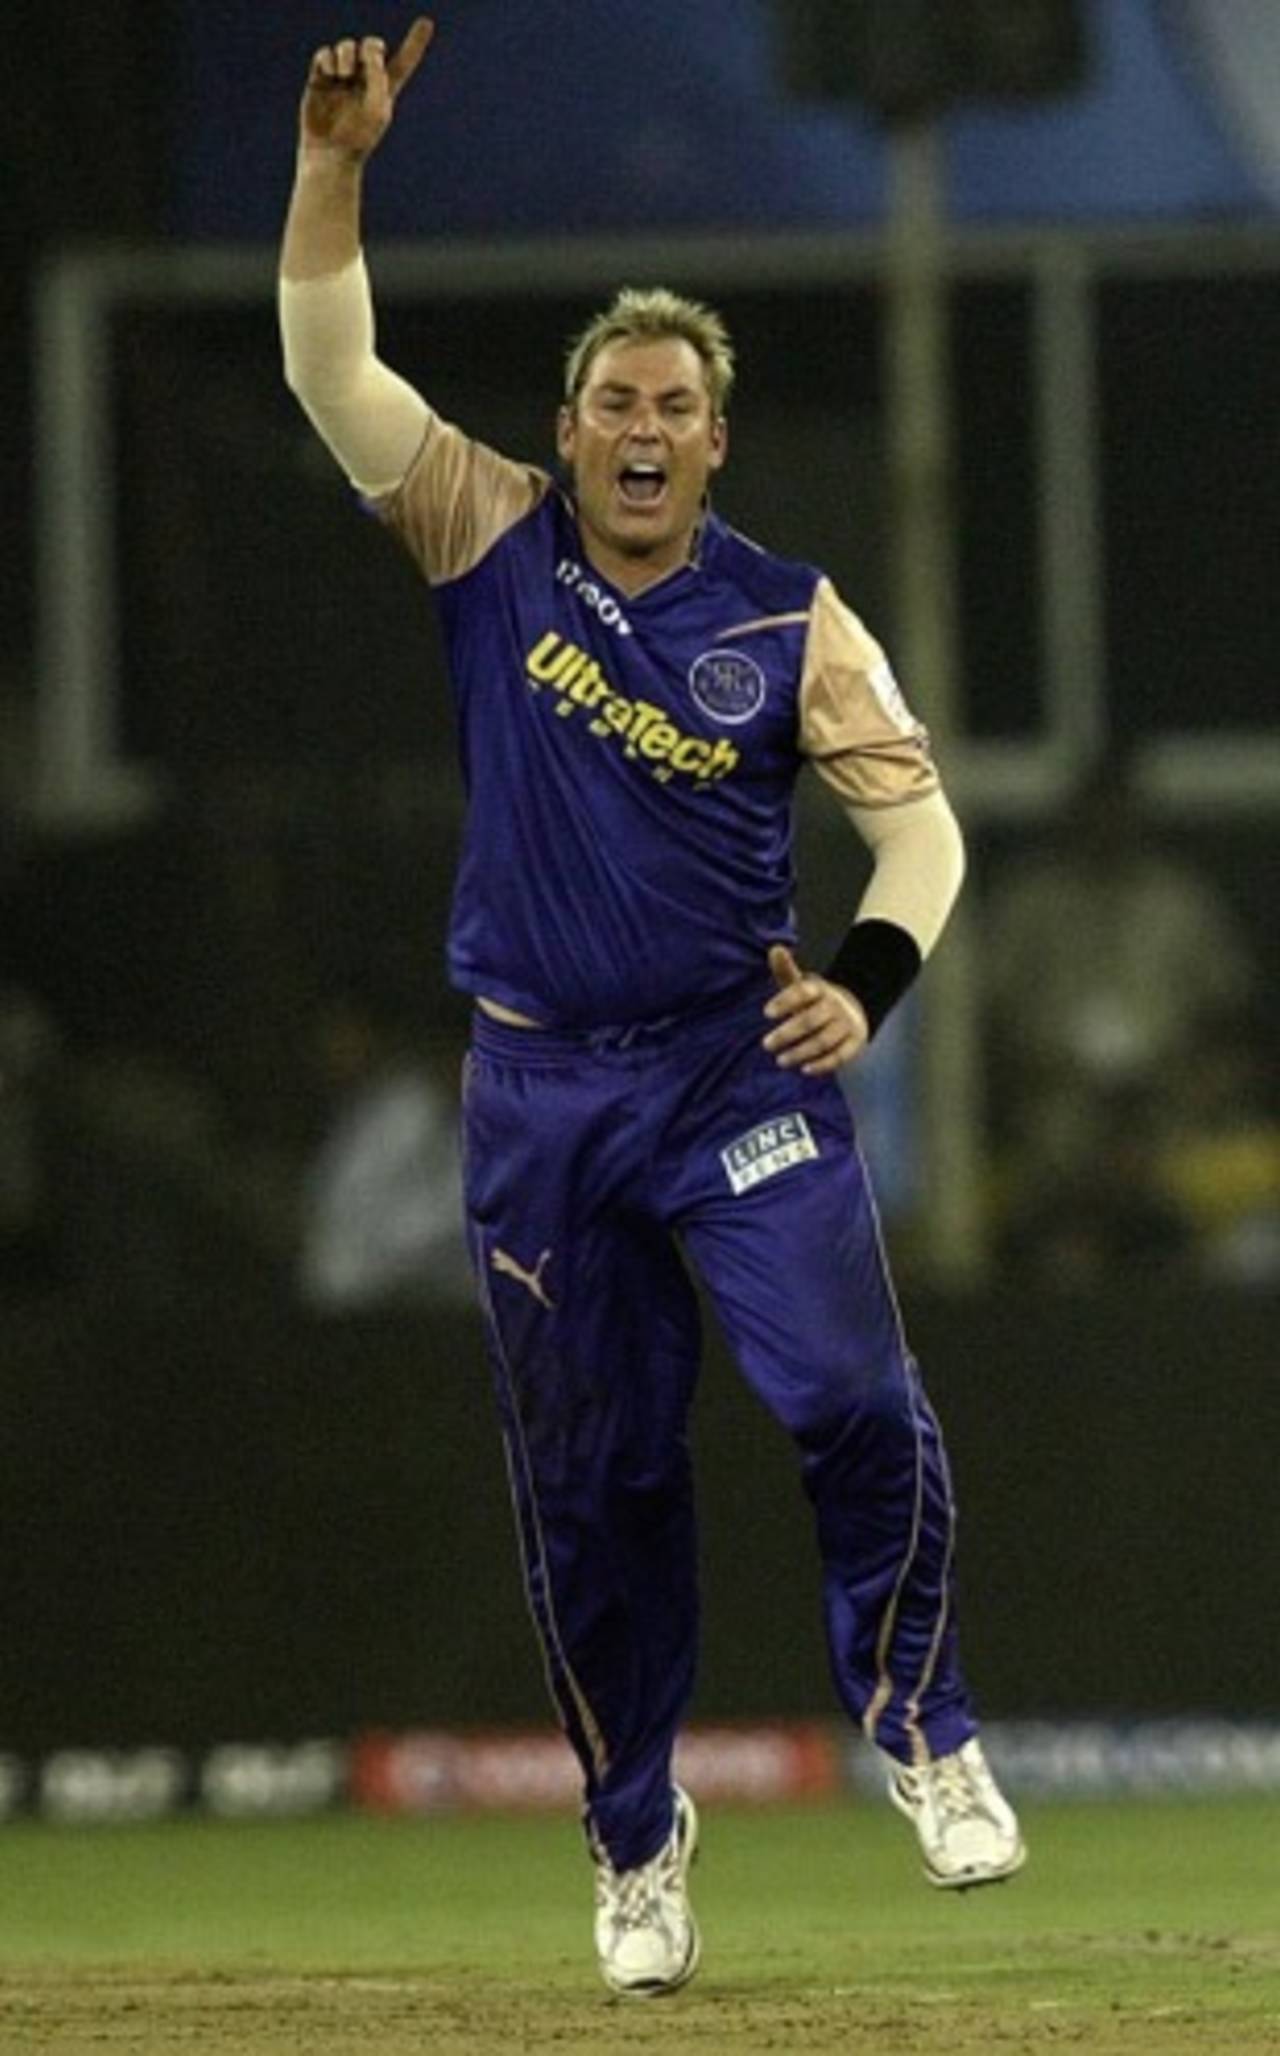 Shane Warne was in excellent form against Deccan Chargers, Rajasthan Royals v Deccan Chargers, IPL, March 26, 2010